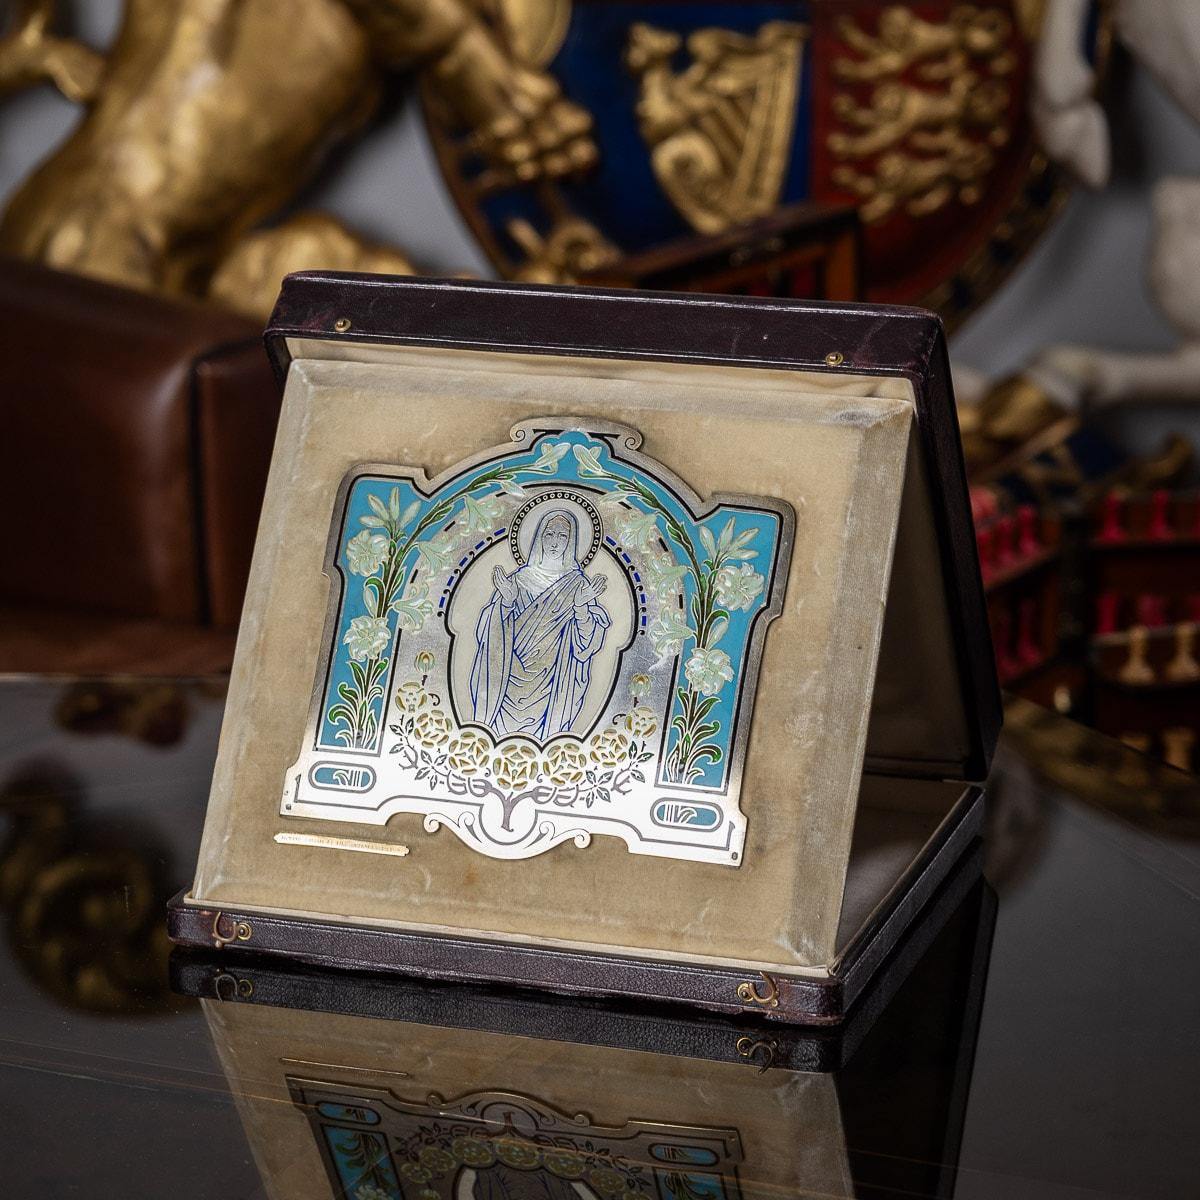 19th century French silver & enamel religious Icon depicting St Mary (Mary, mother of Jesus).

CONDITION
In Great Condition - No Damage.

BOX Size
Height: 22cm
Width: 24cm
Depth: 4cm
Weight: 1410g.